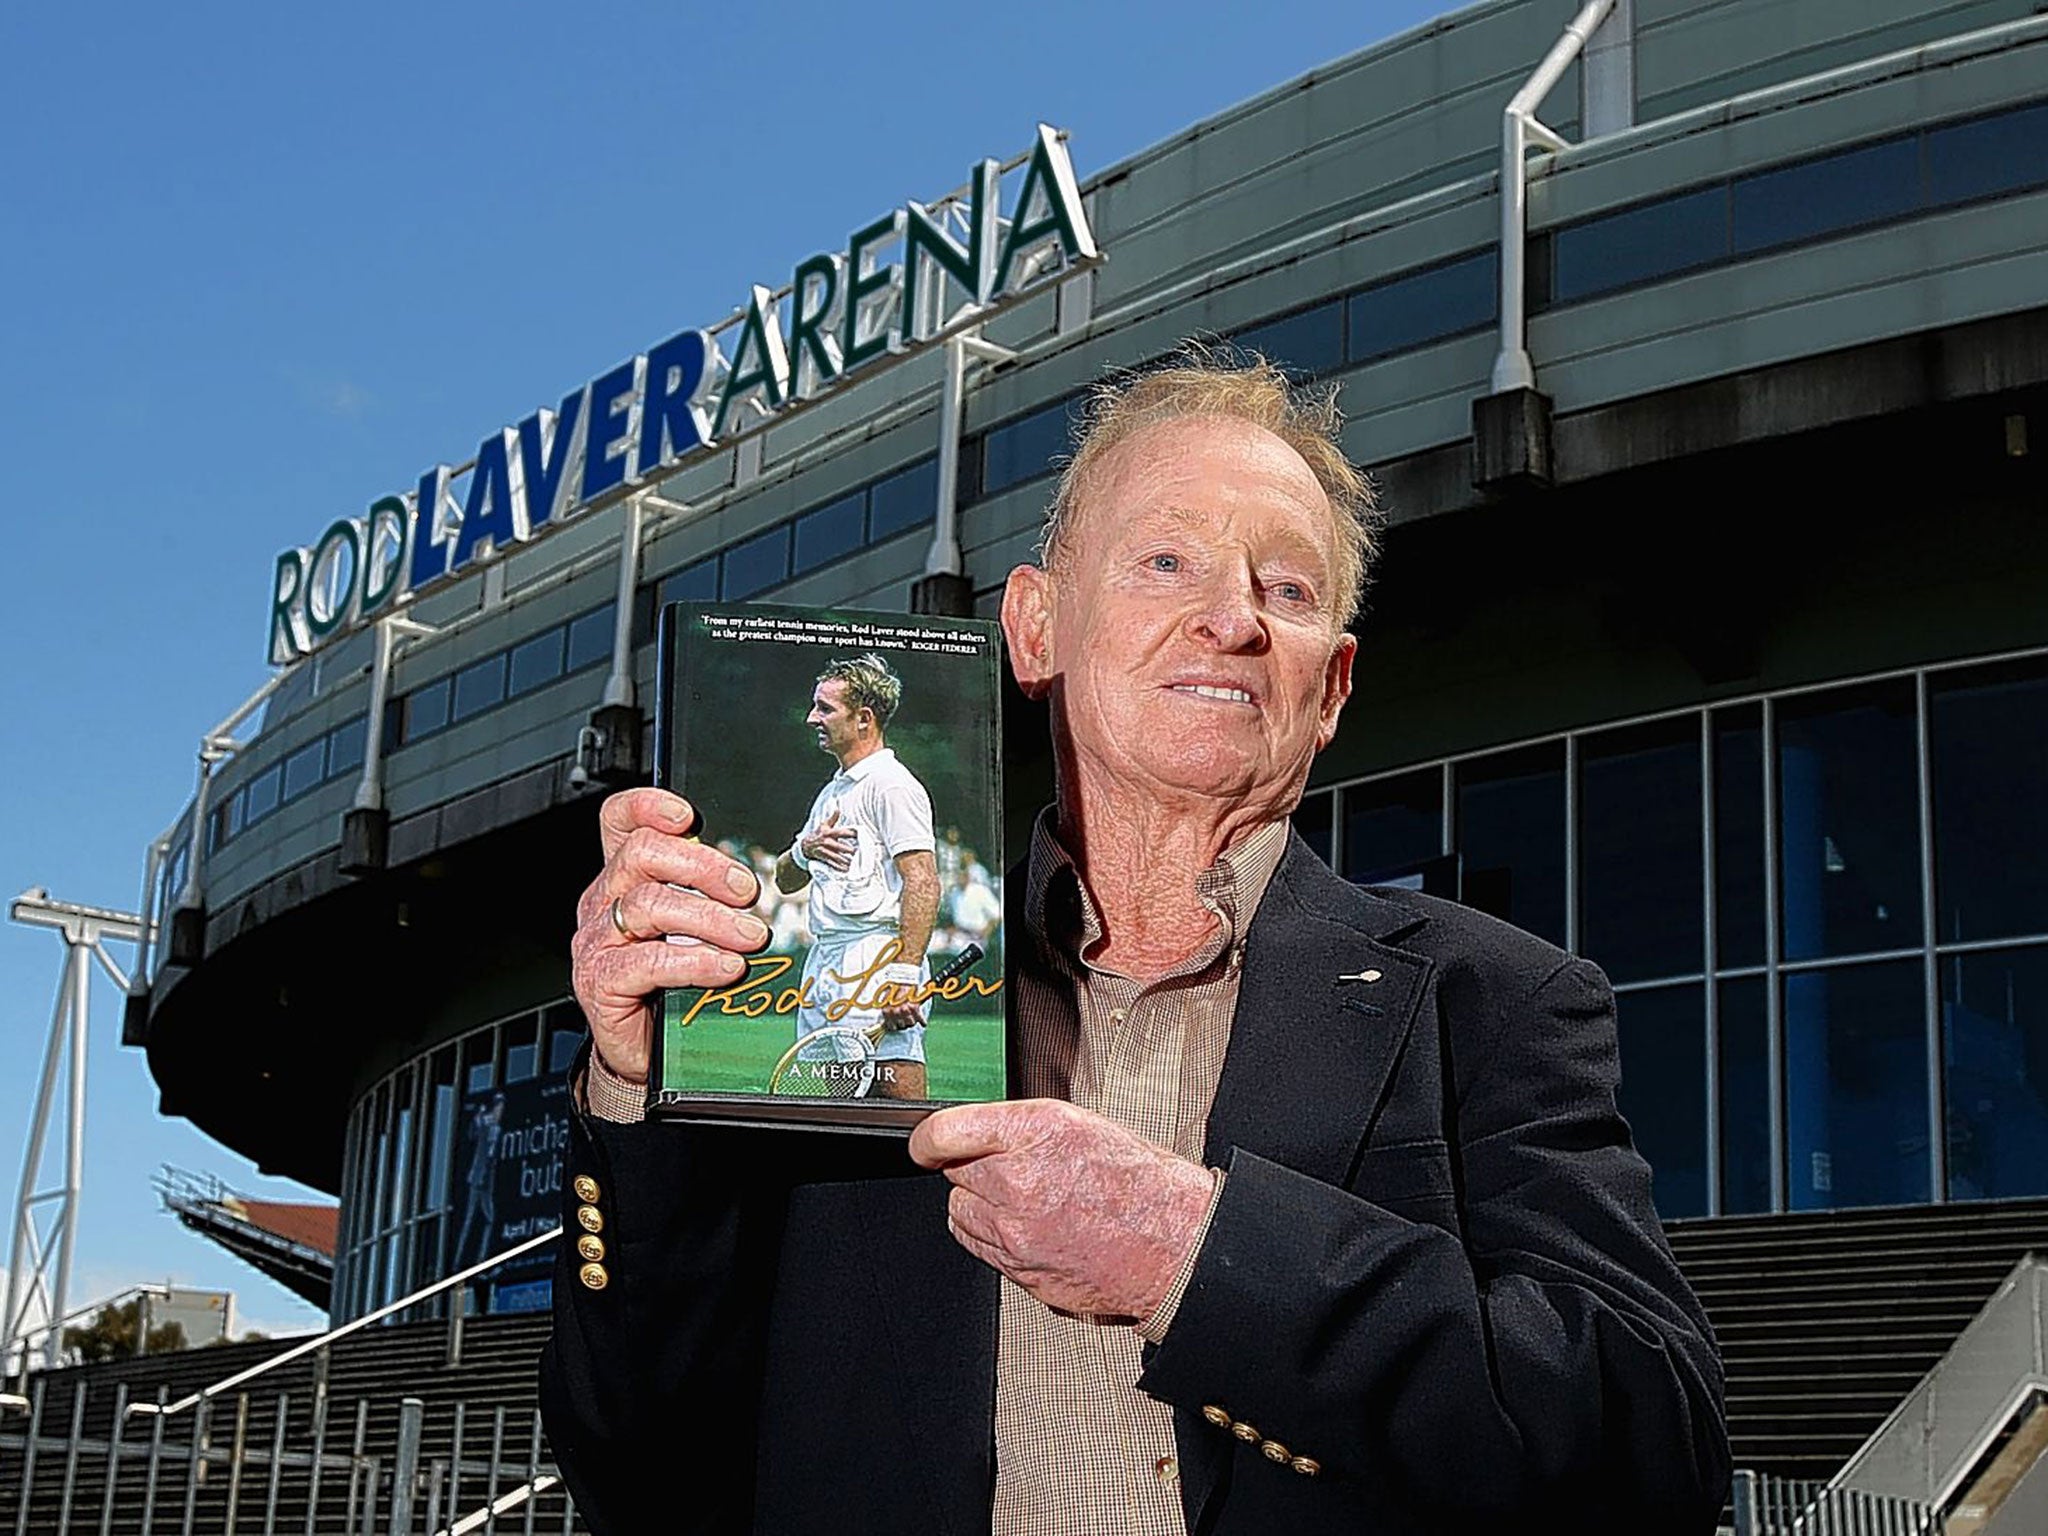 Rod Laver launches his new autobiography at the Rod Laver Arena in Melbourne, Australia